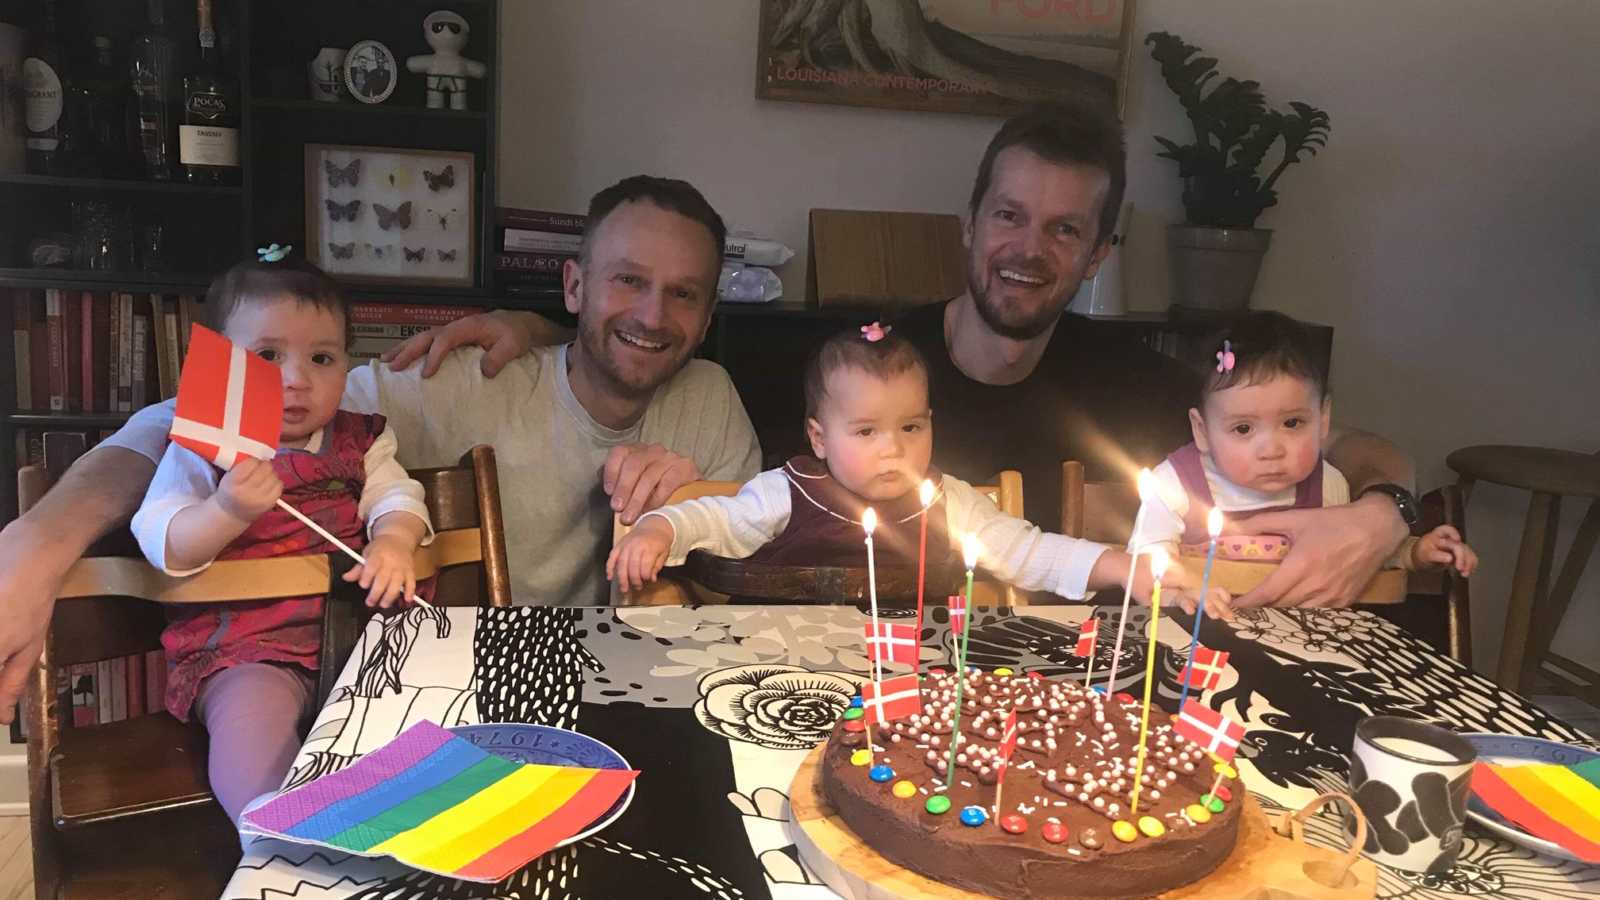 Husbands smiles as they crouch behind their triplets in highchairs who sit at table with birthday cake